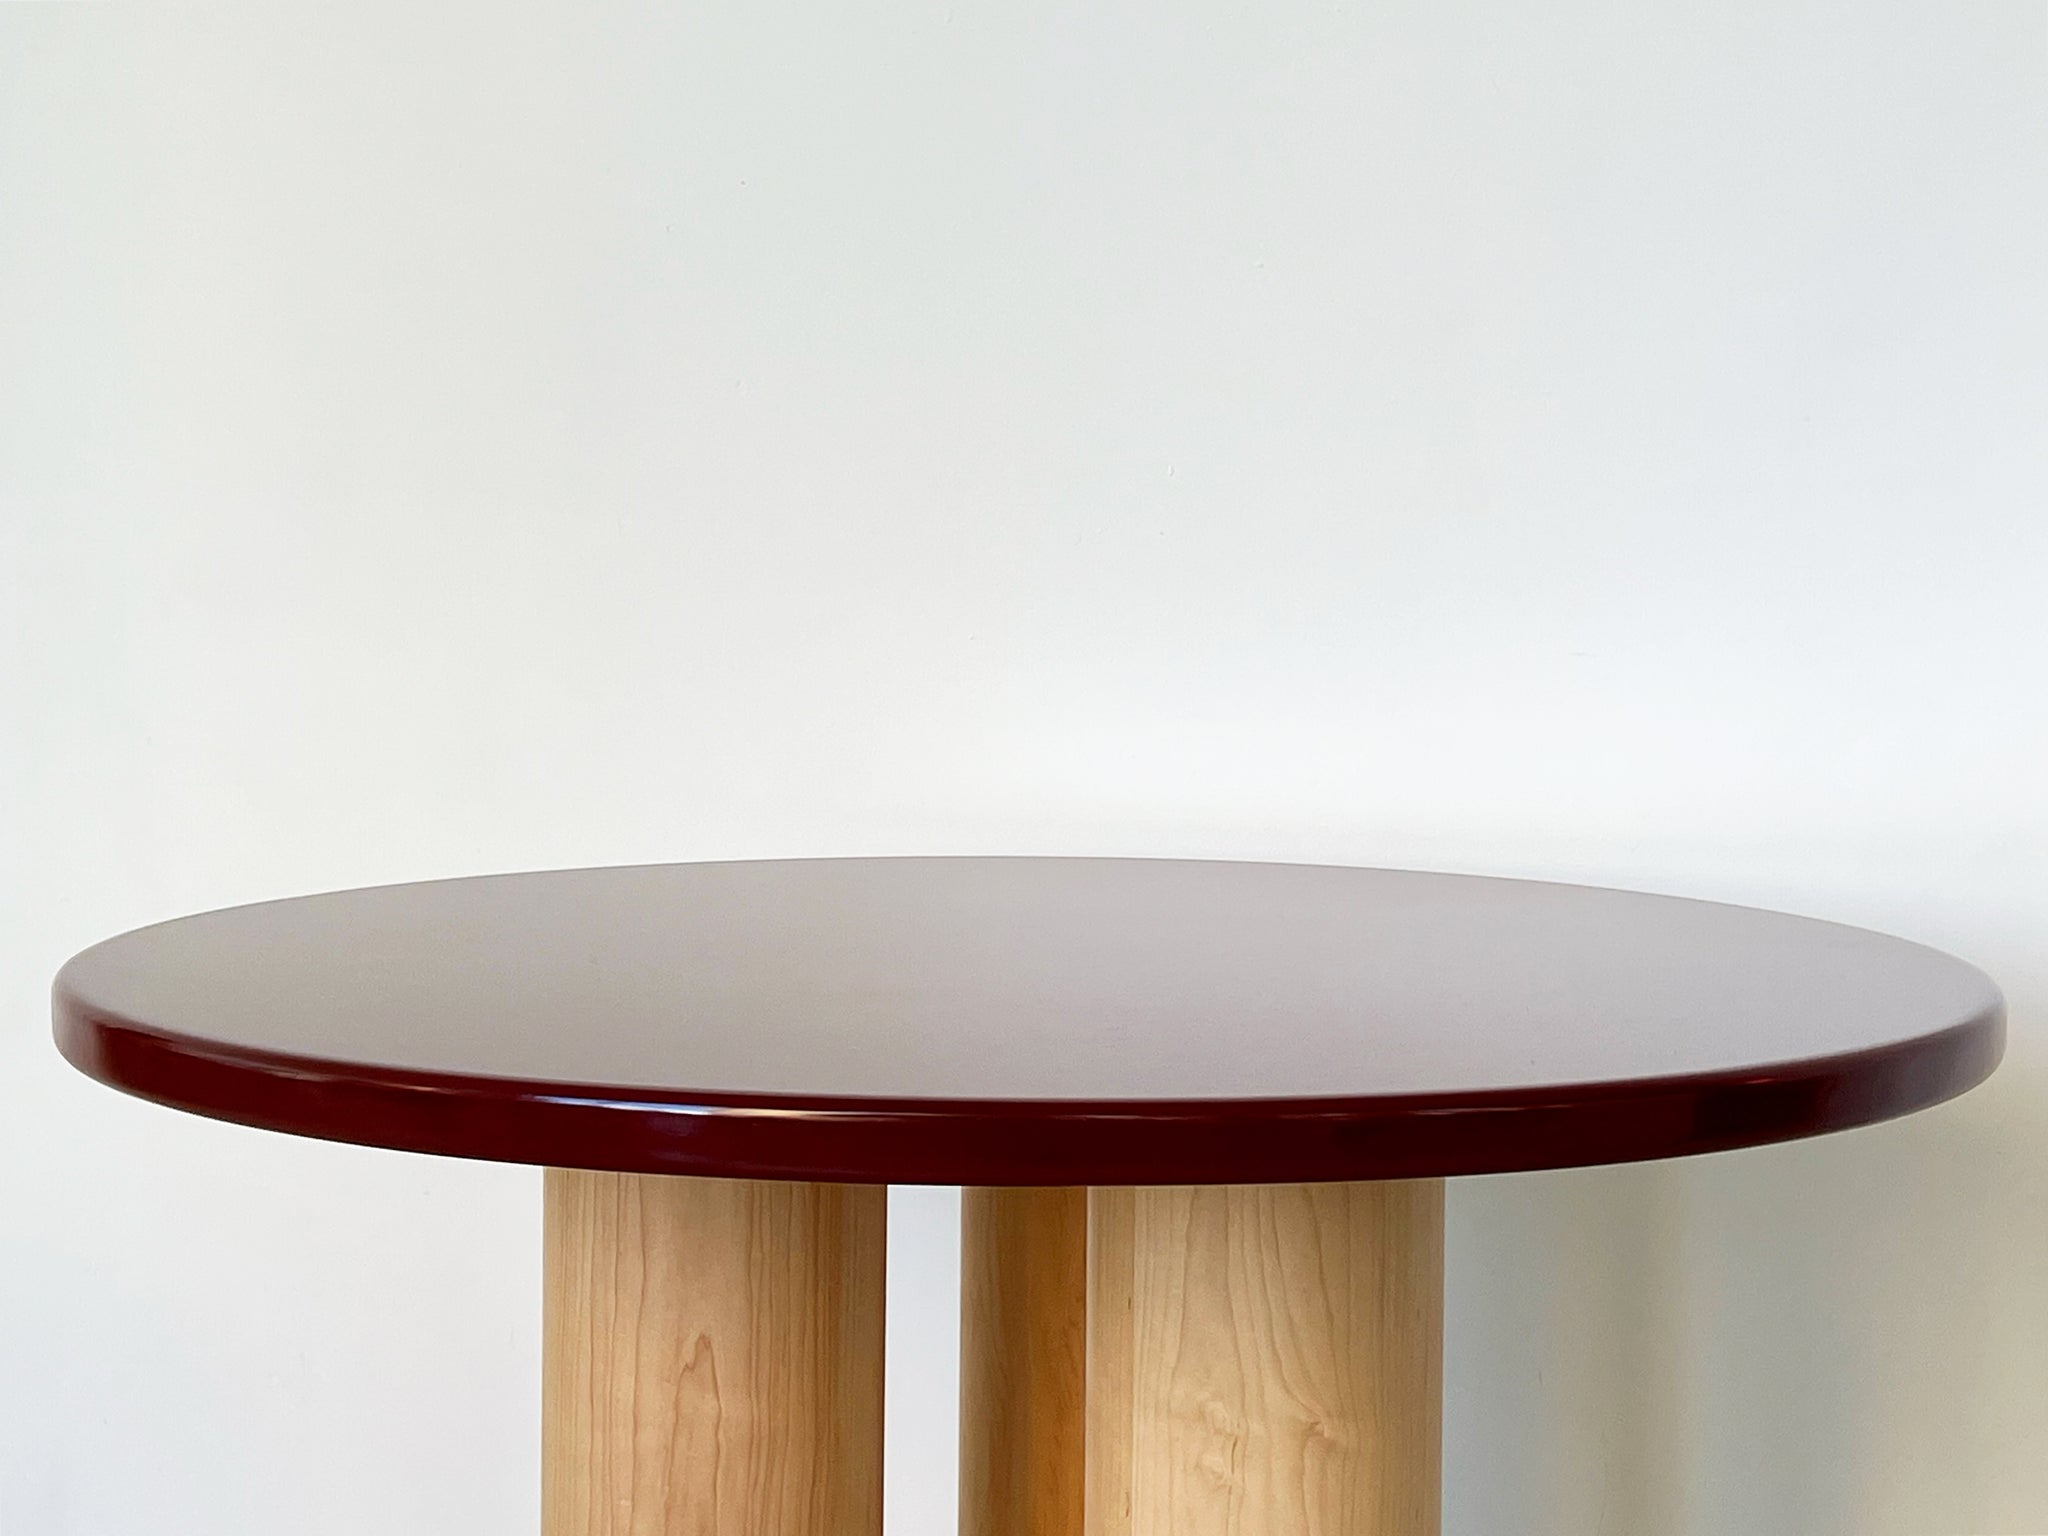 The Pier Table in Wine Red and Maple